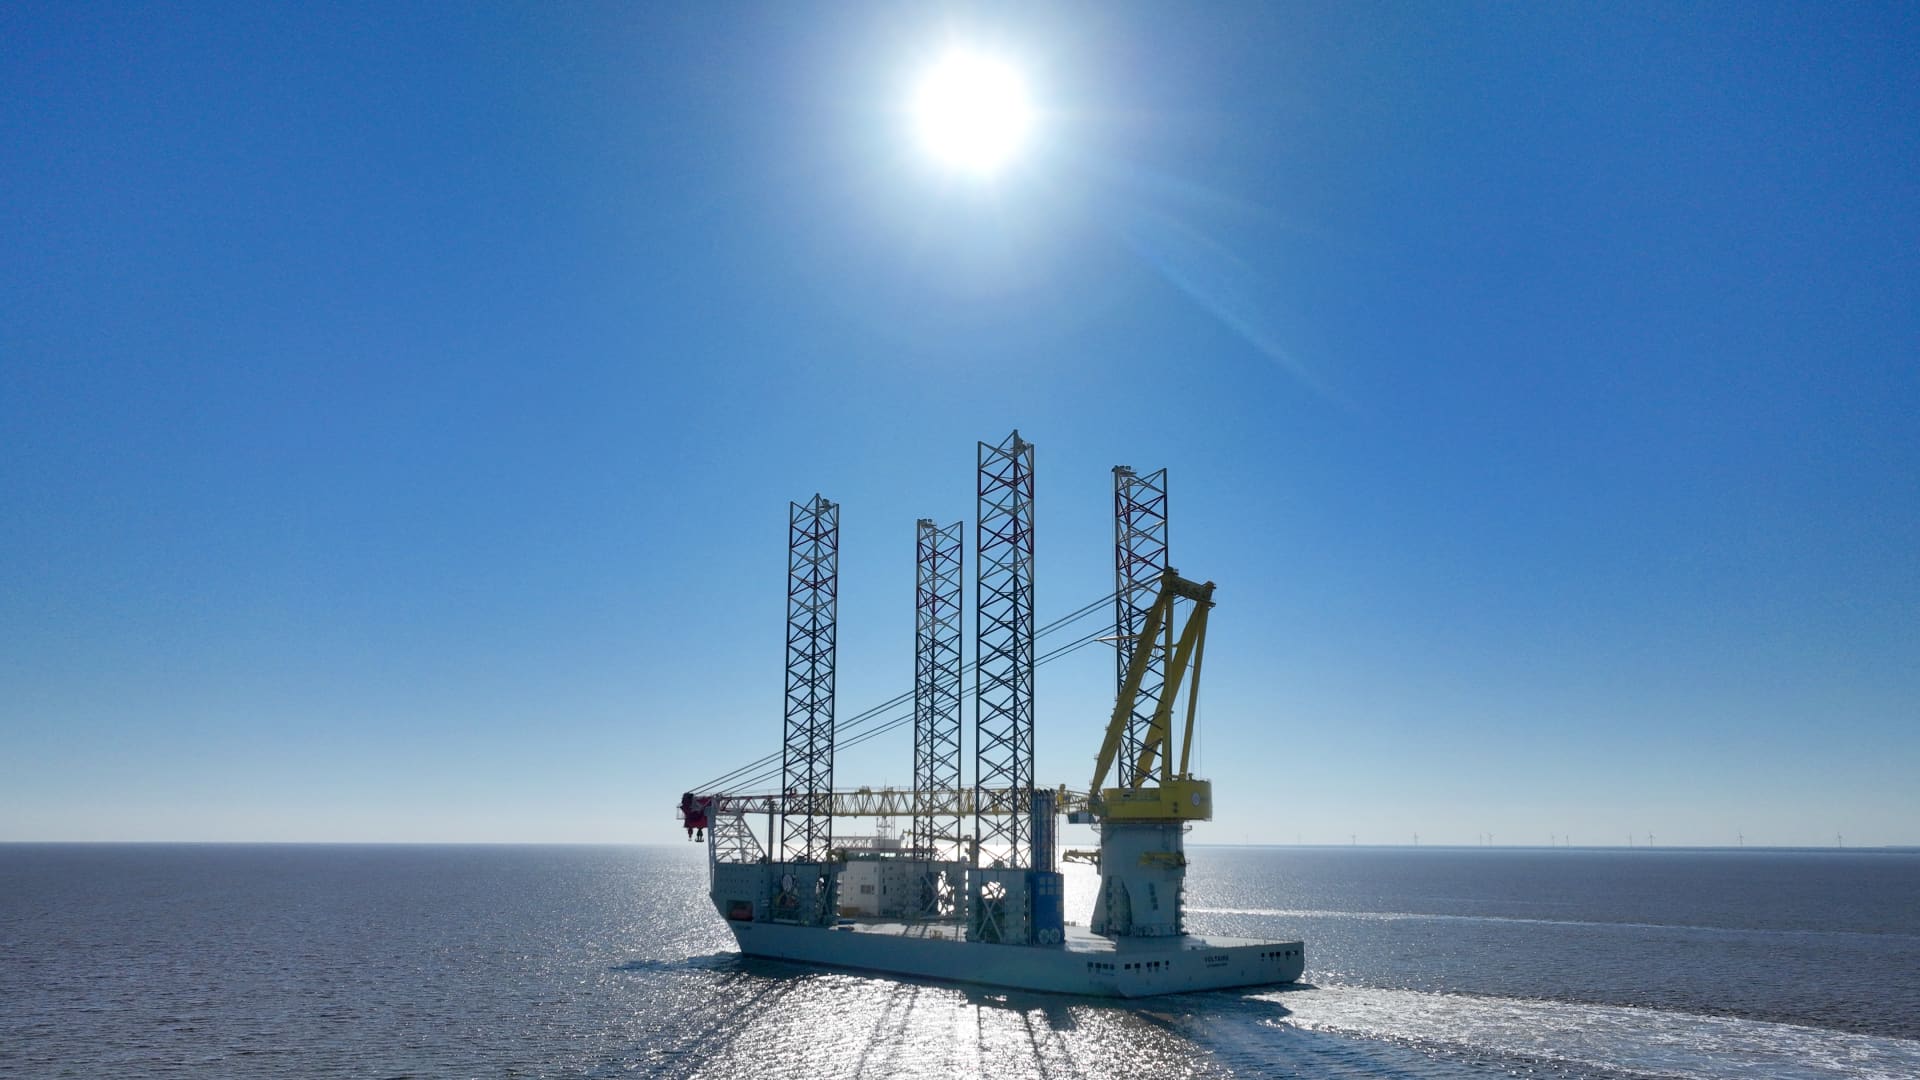 Check out the giant ship critical to building the world's biggest offshore wind farm